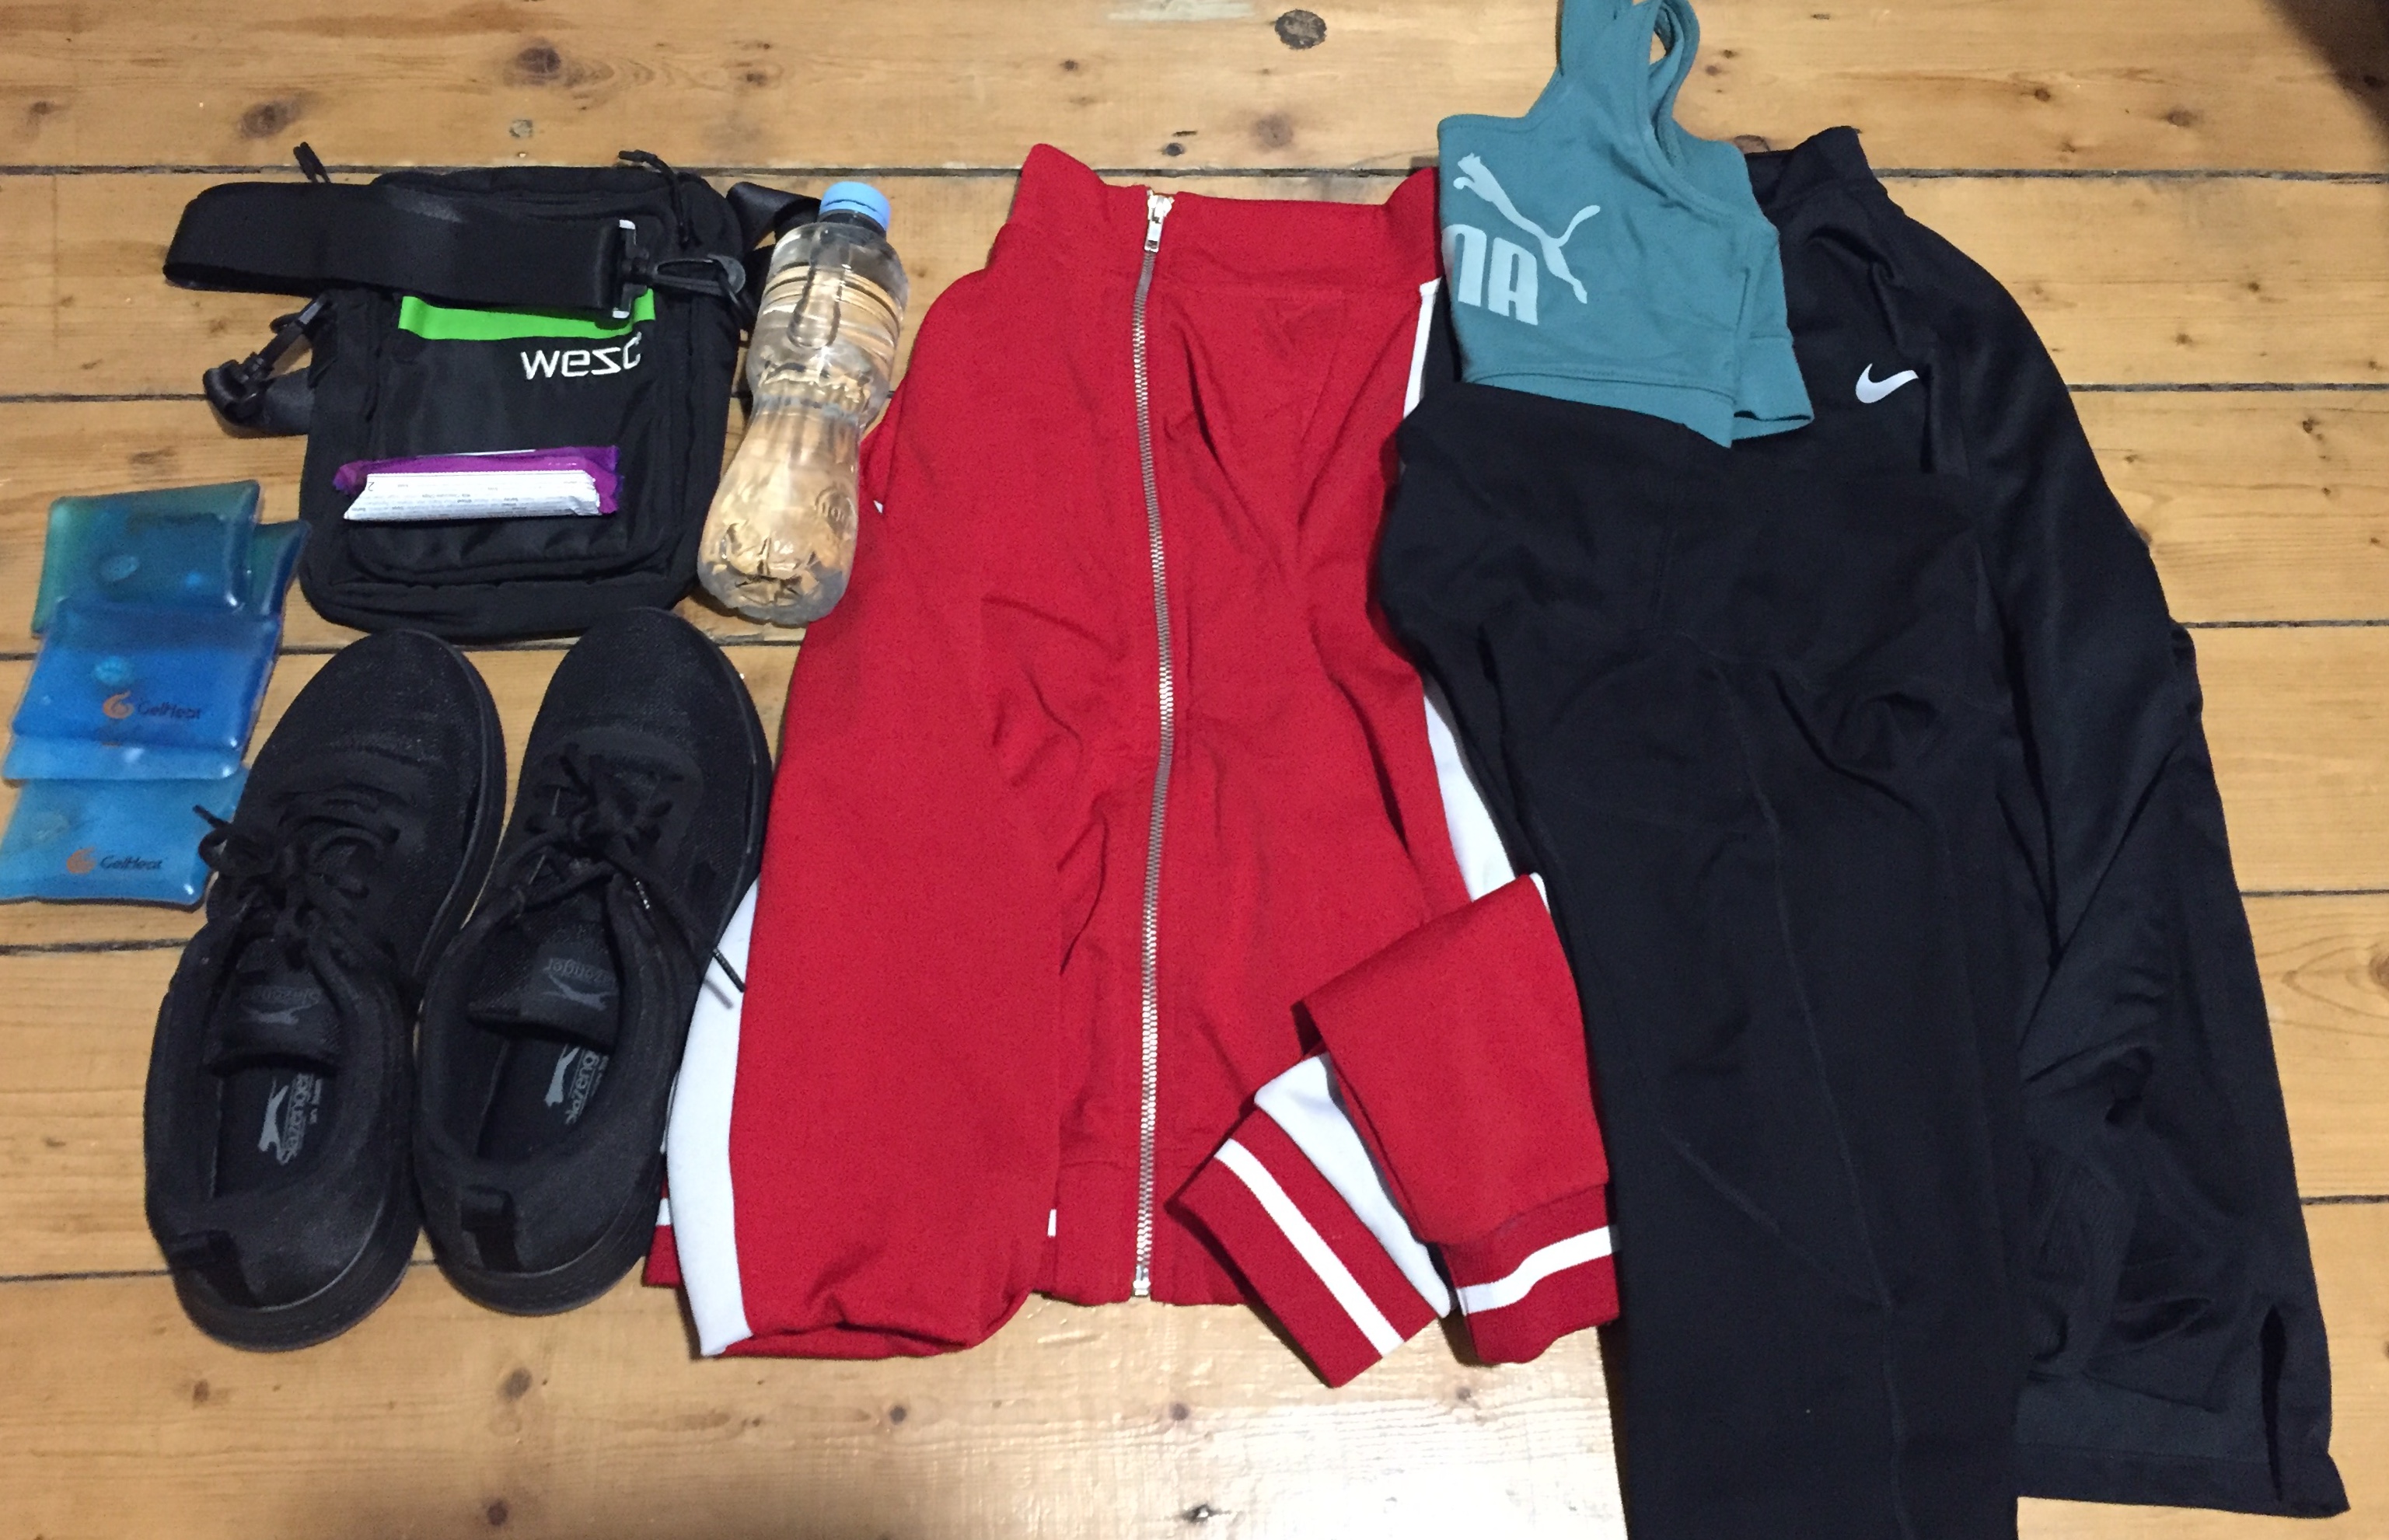 A collection of clothes and running gear